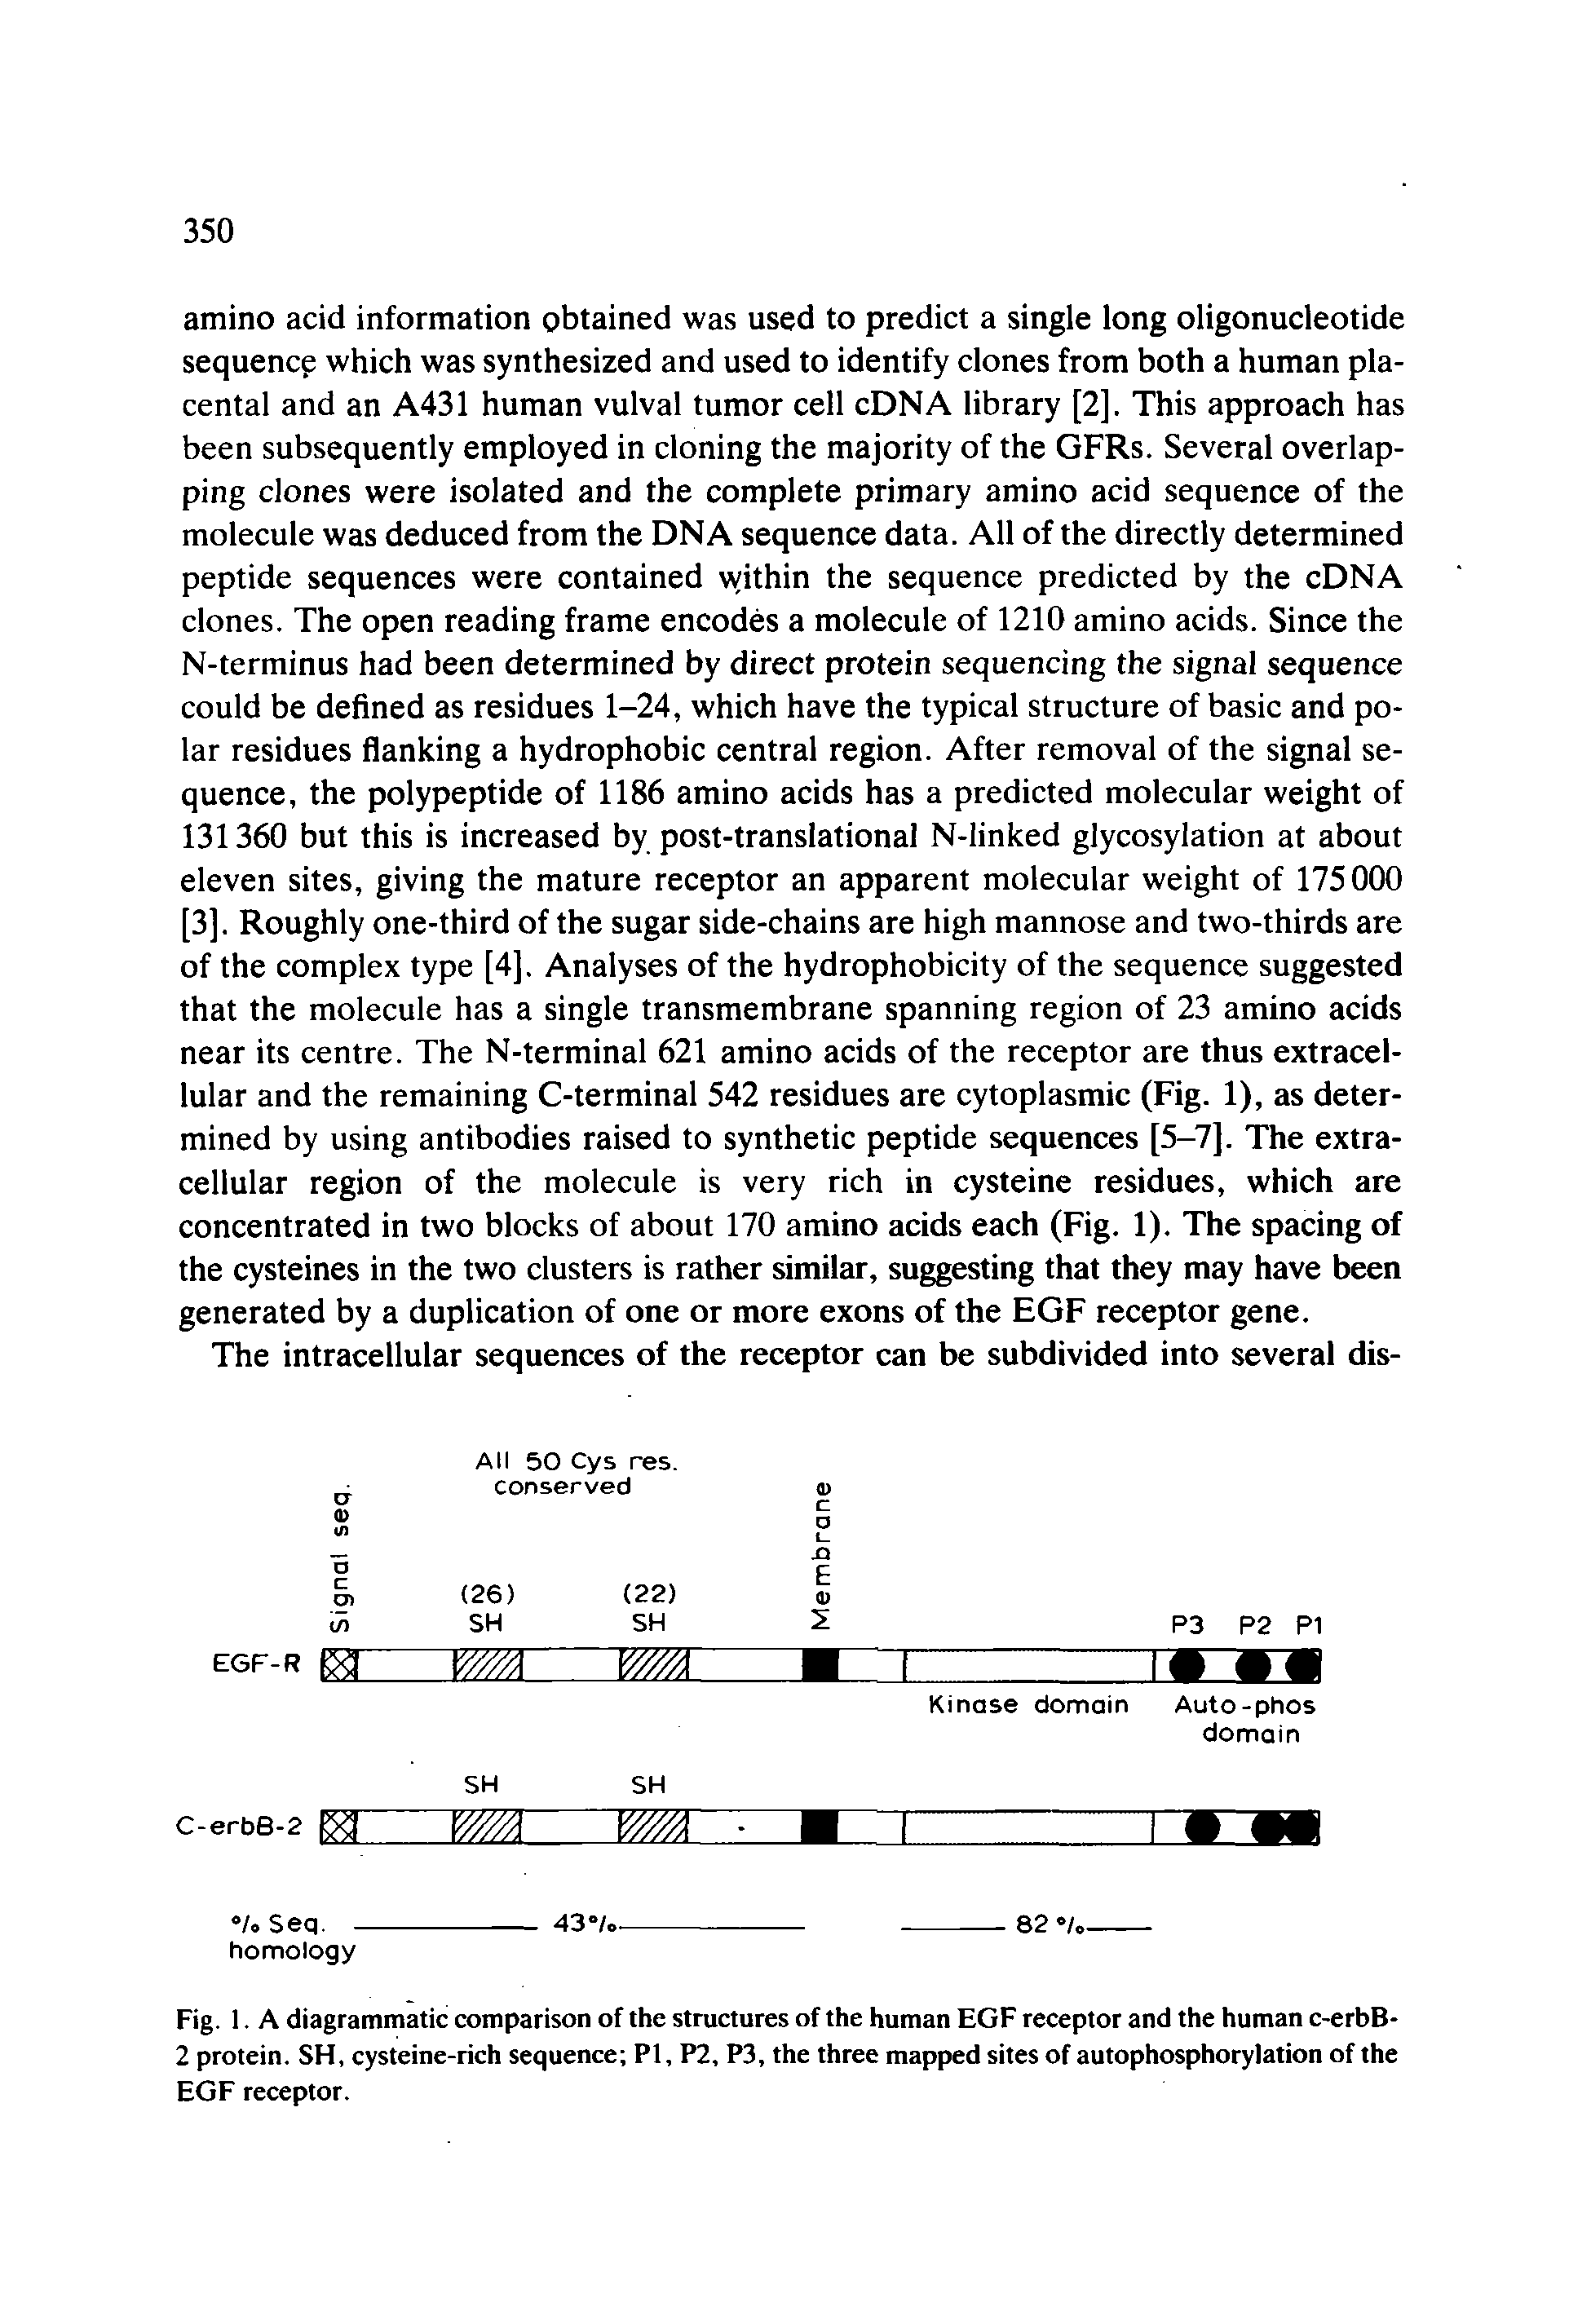 Fig. 1. A diagrammatic comparison of the structures of the human EGF receptor and the human c-erbB-2 protein. SH, cysteine-rich sequence PI, P2, P3, the three mapped sites of autophosphorylation of the EGF receptor.